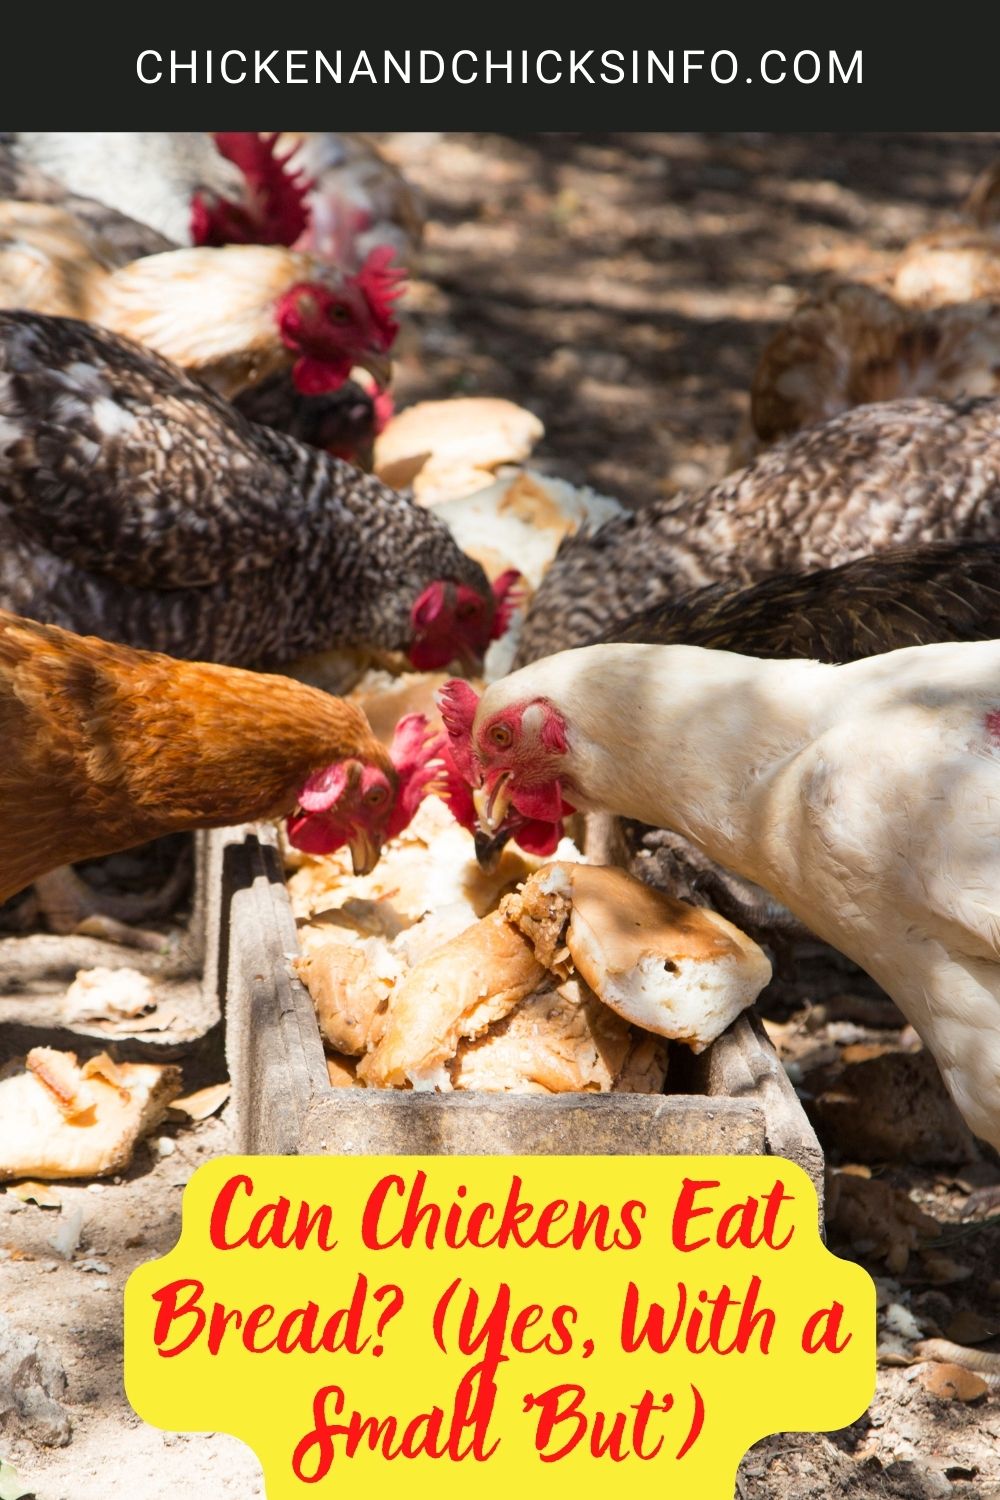 Can Chickens Eat Bread? (Yes, With a Small 'But') poster.
